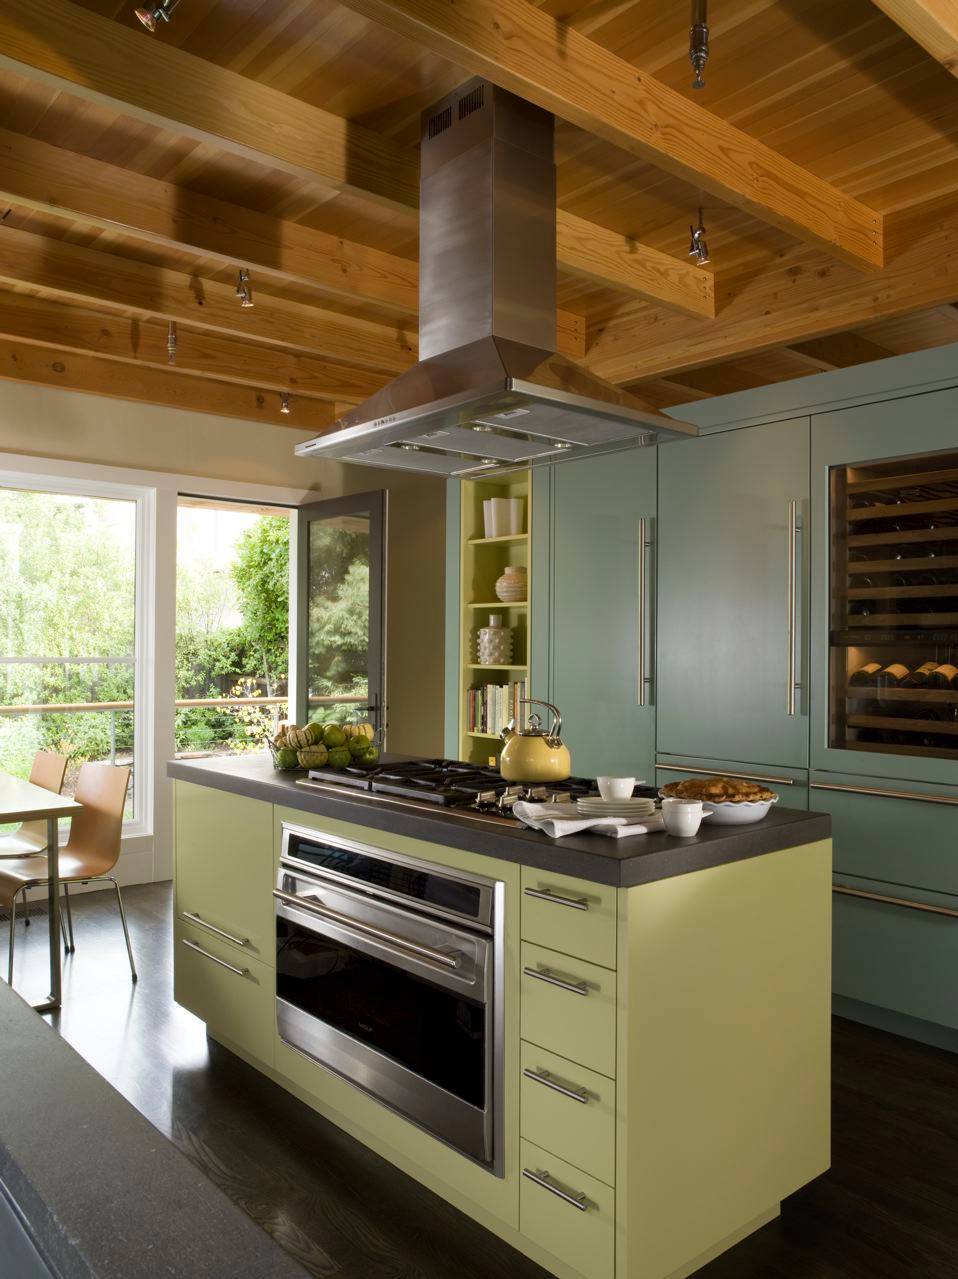 Pictures Of Kitchen Islands With Stove Tops : Photos Hgtv : Take a peek